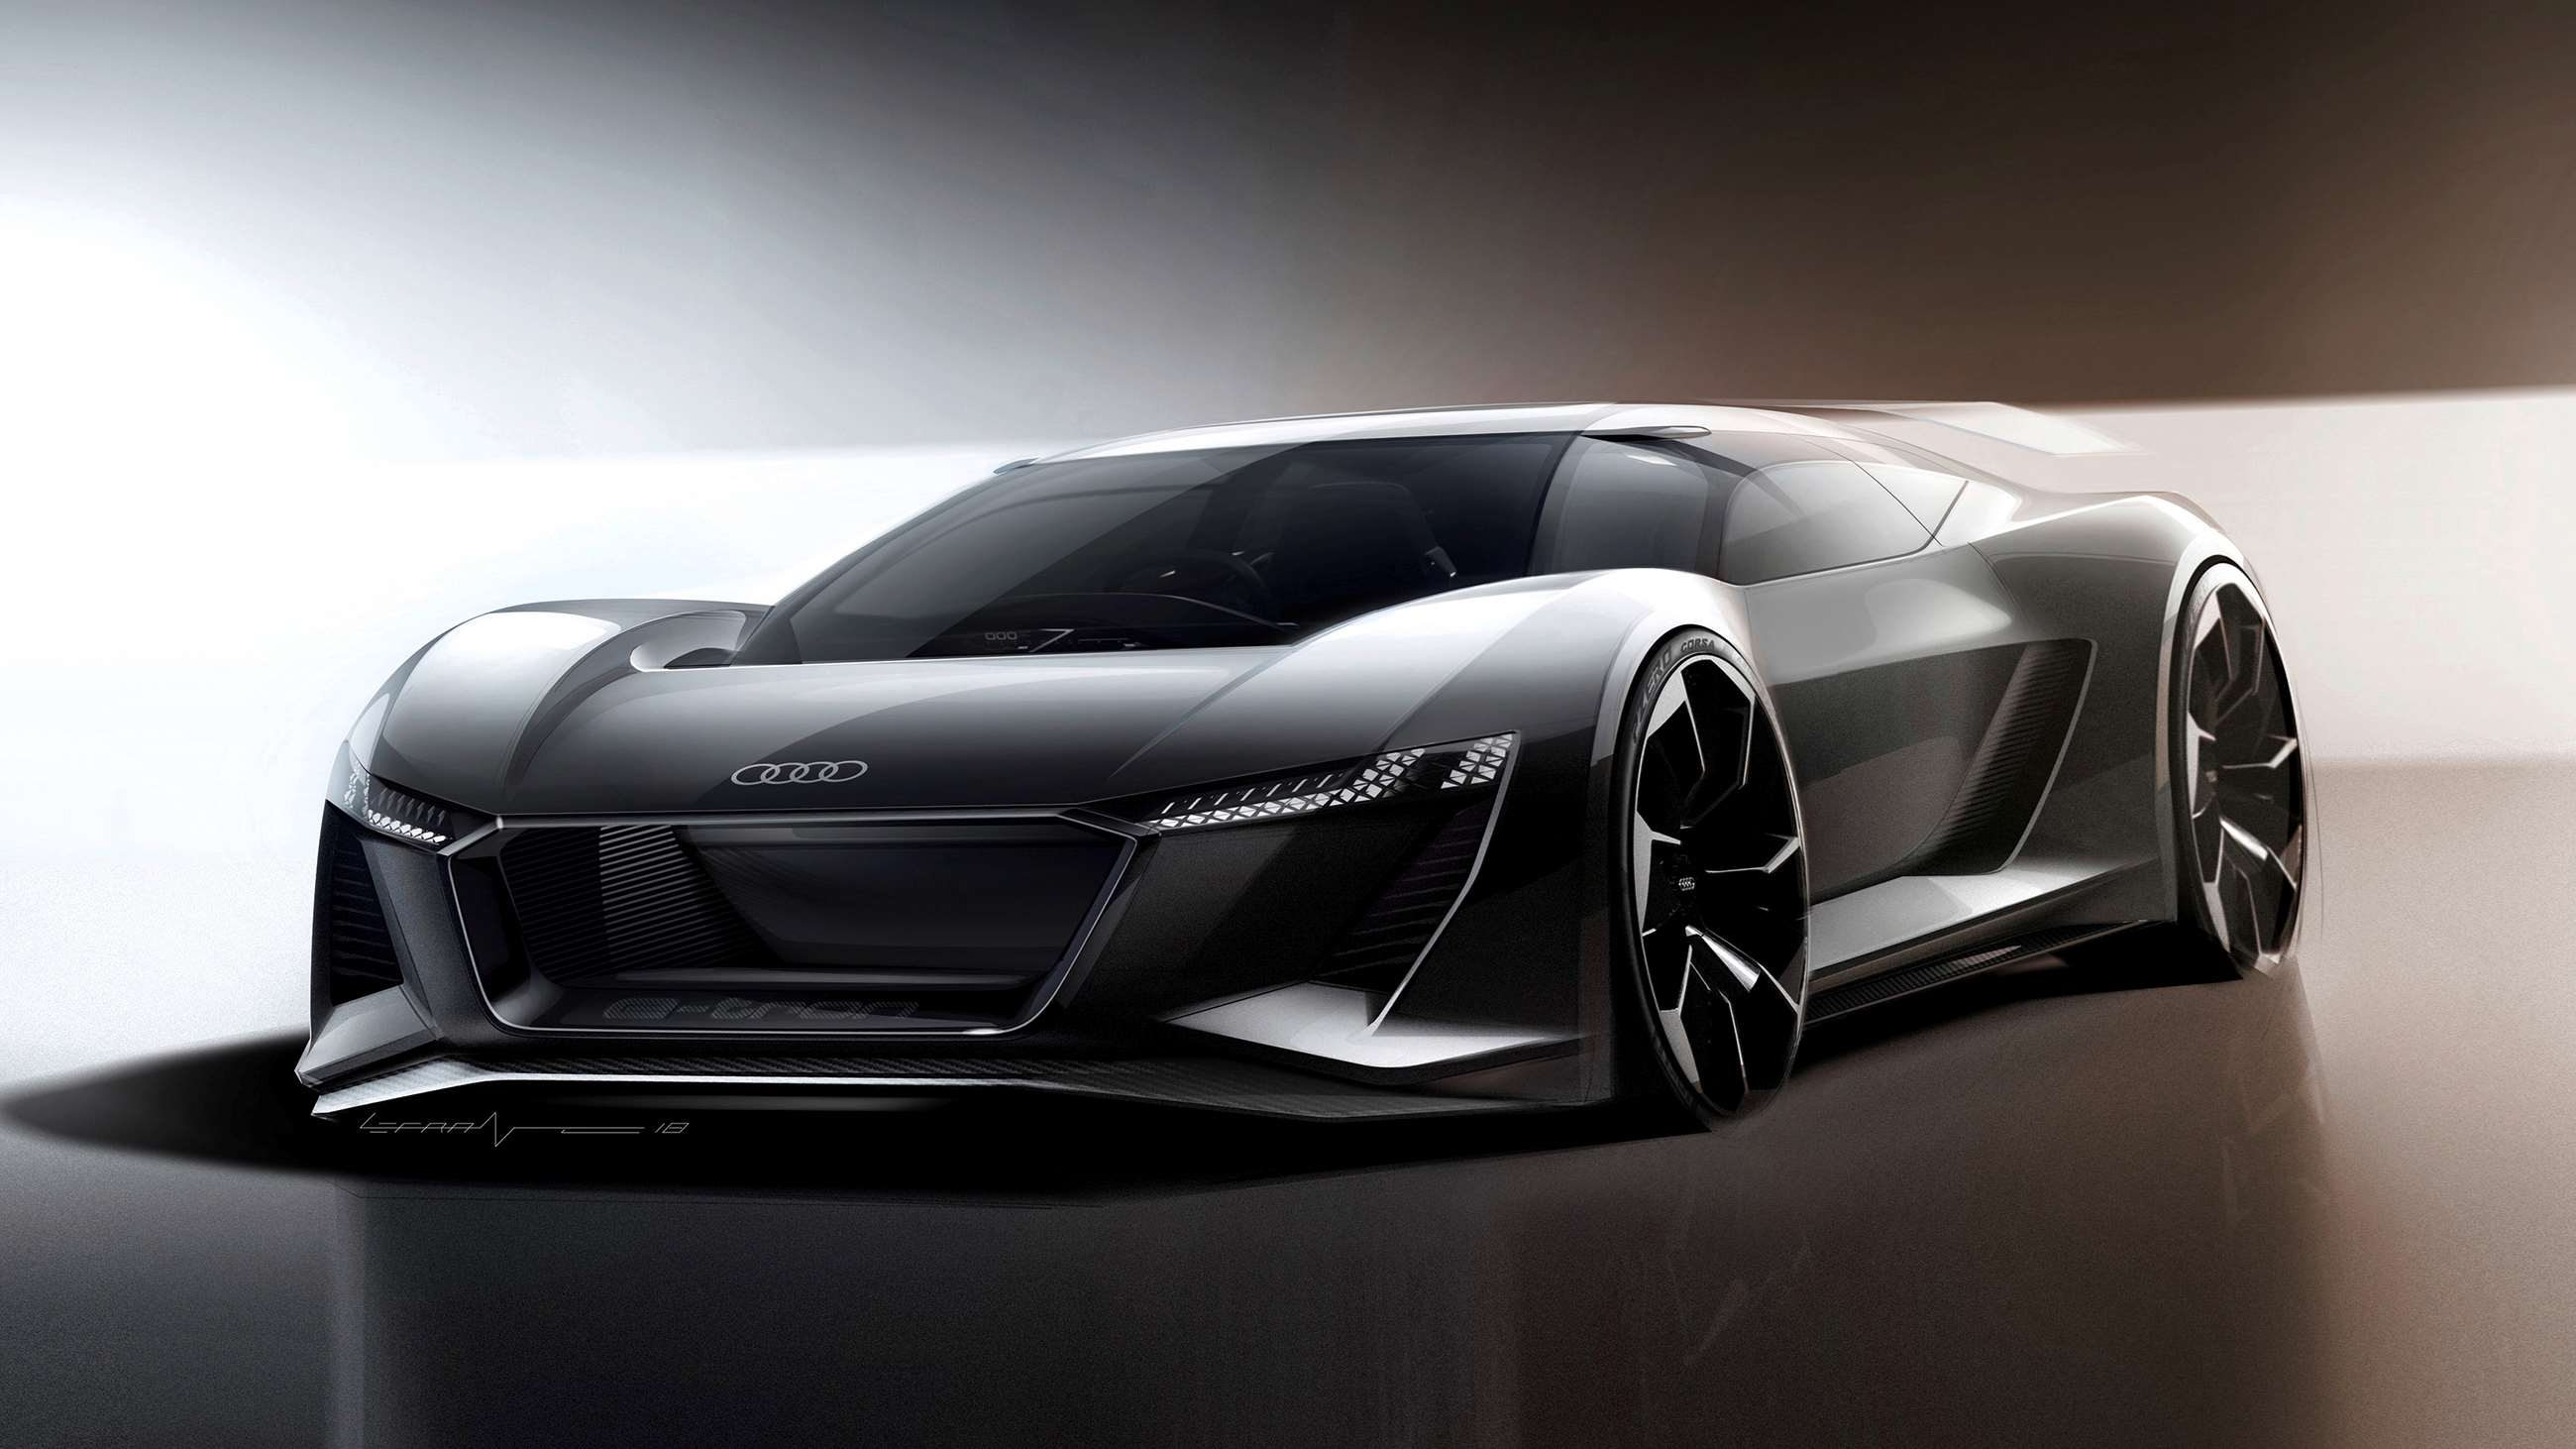 Audi's new electric supercar will let you sit wherever you want to drive